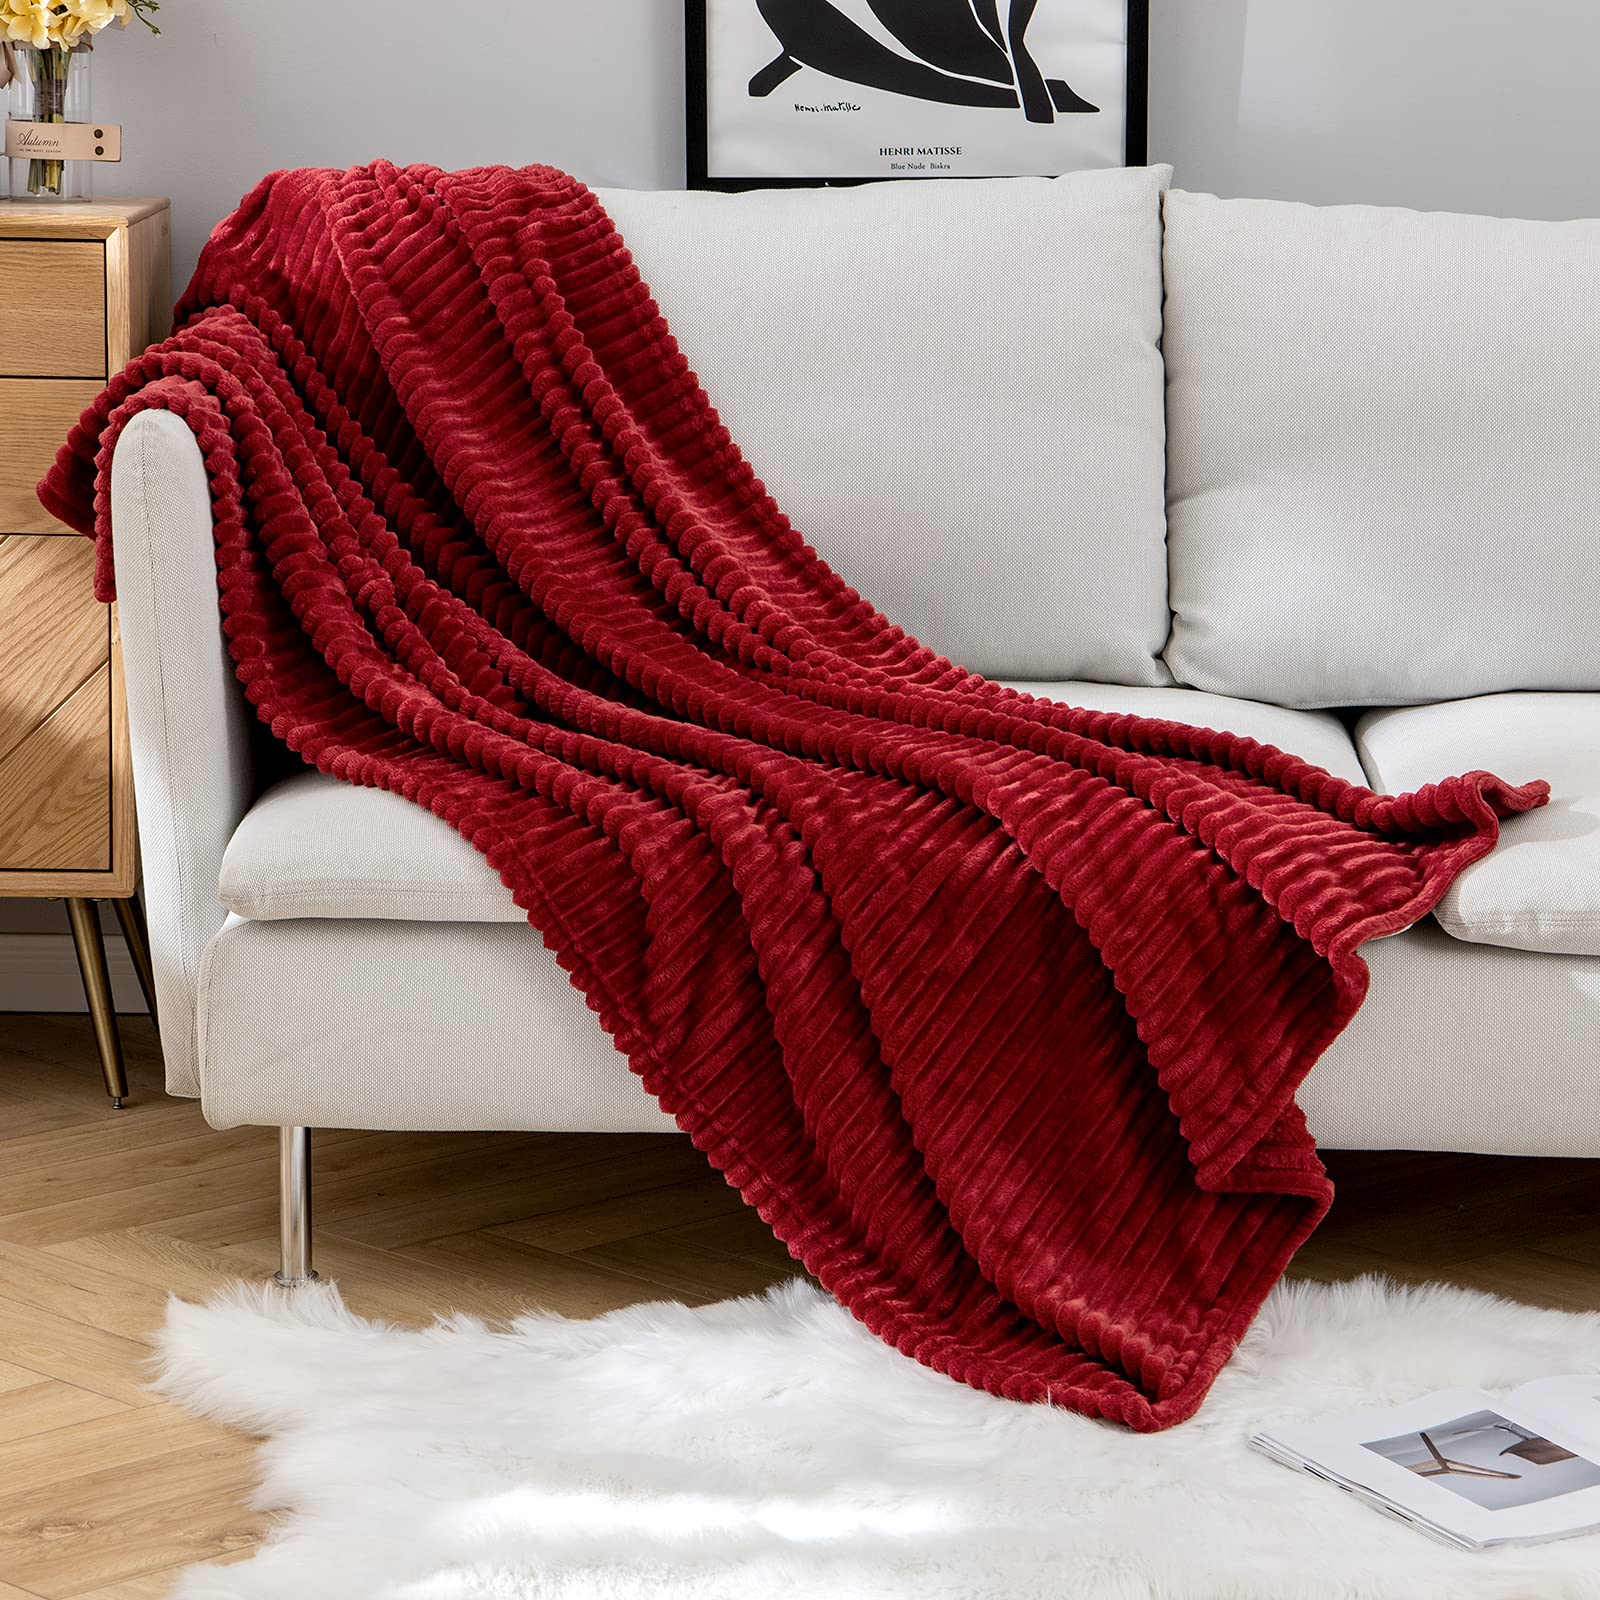 MIULEE christmas Fleece Throw Blanket for couch 300gSM Super Soft Lightweight Plush Striped Blanket, Burgundy Red Warm cozy Brea